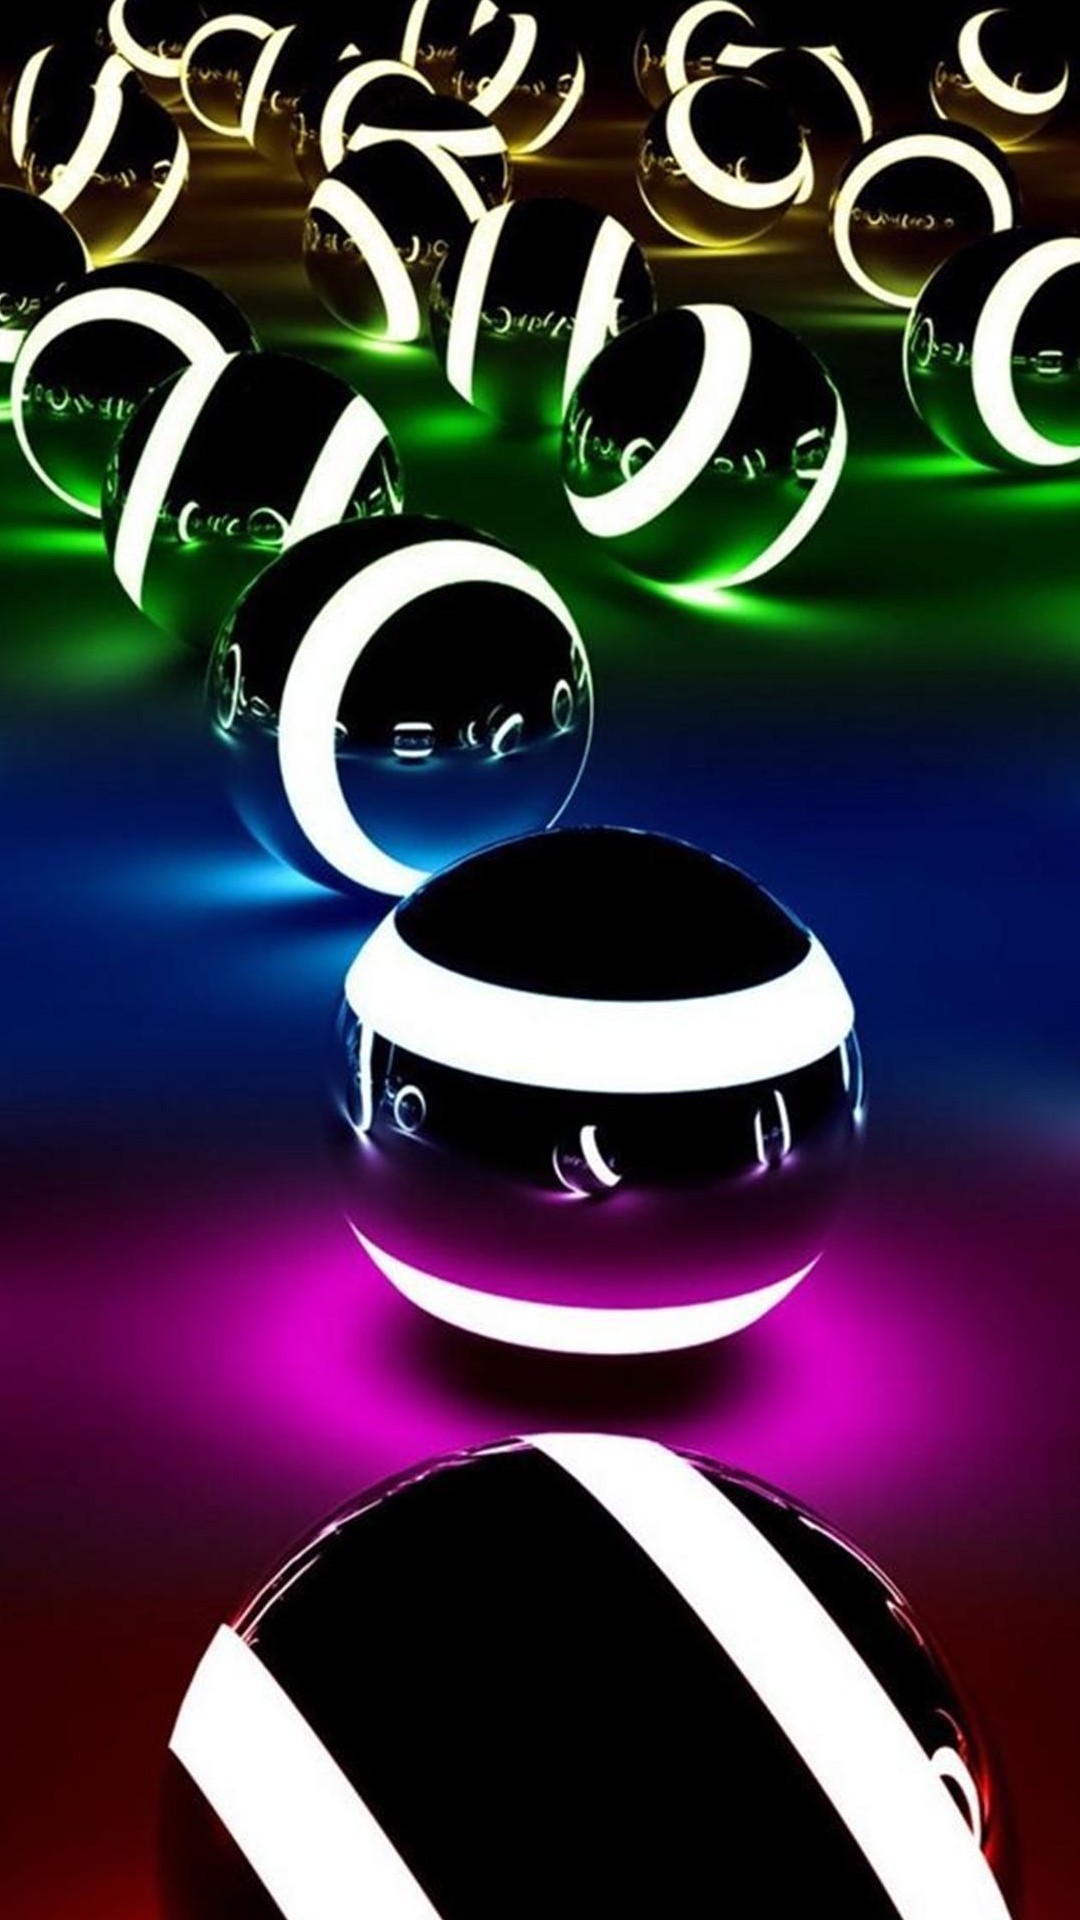 3d wallpaper for android phone free download,games,neon,font,graphic design,disco